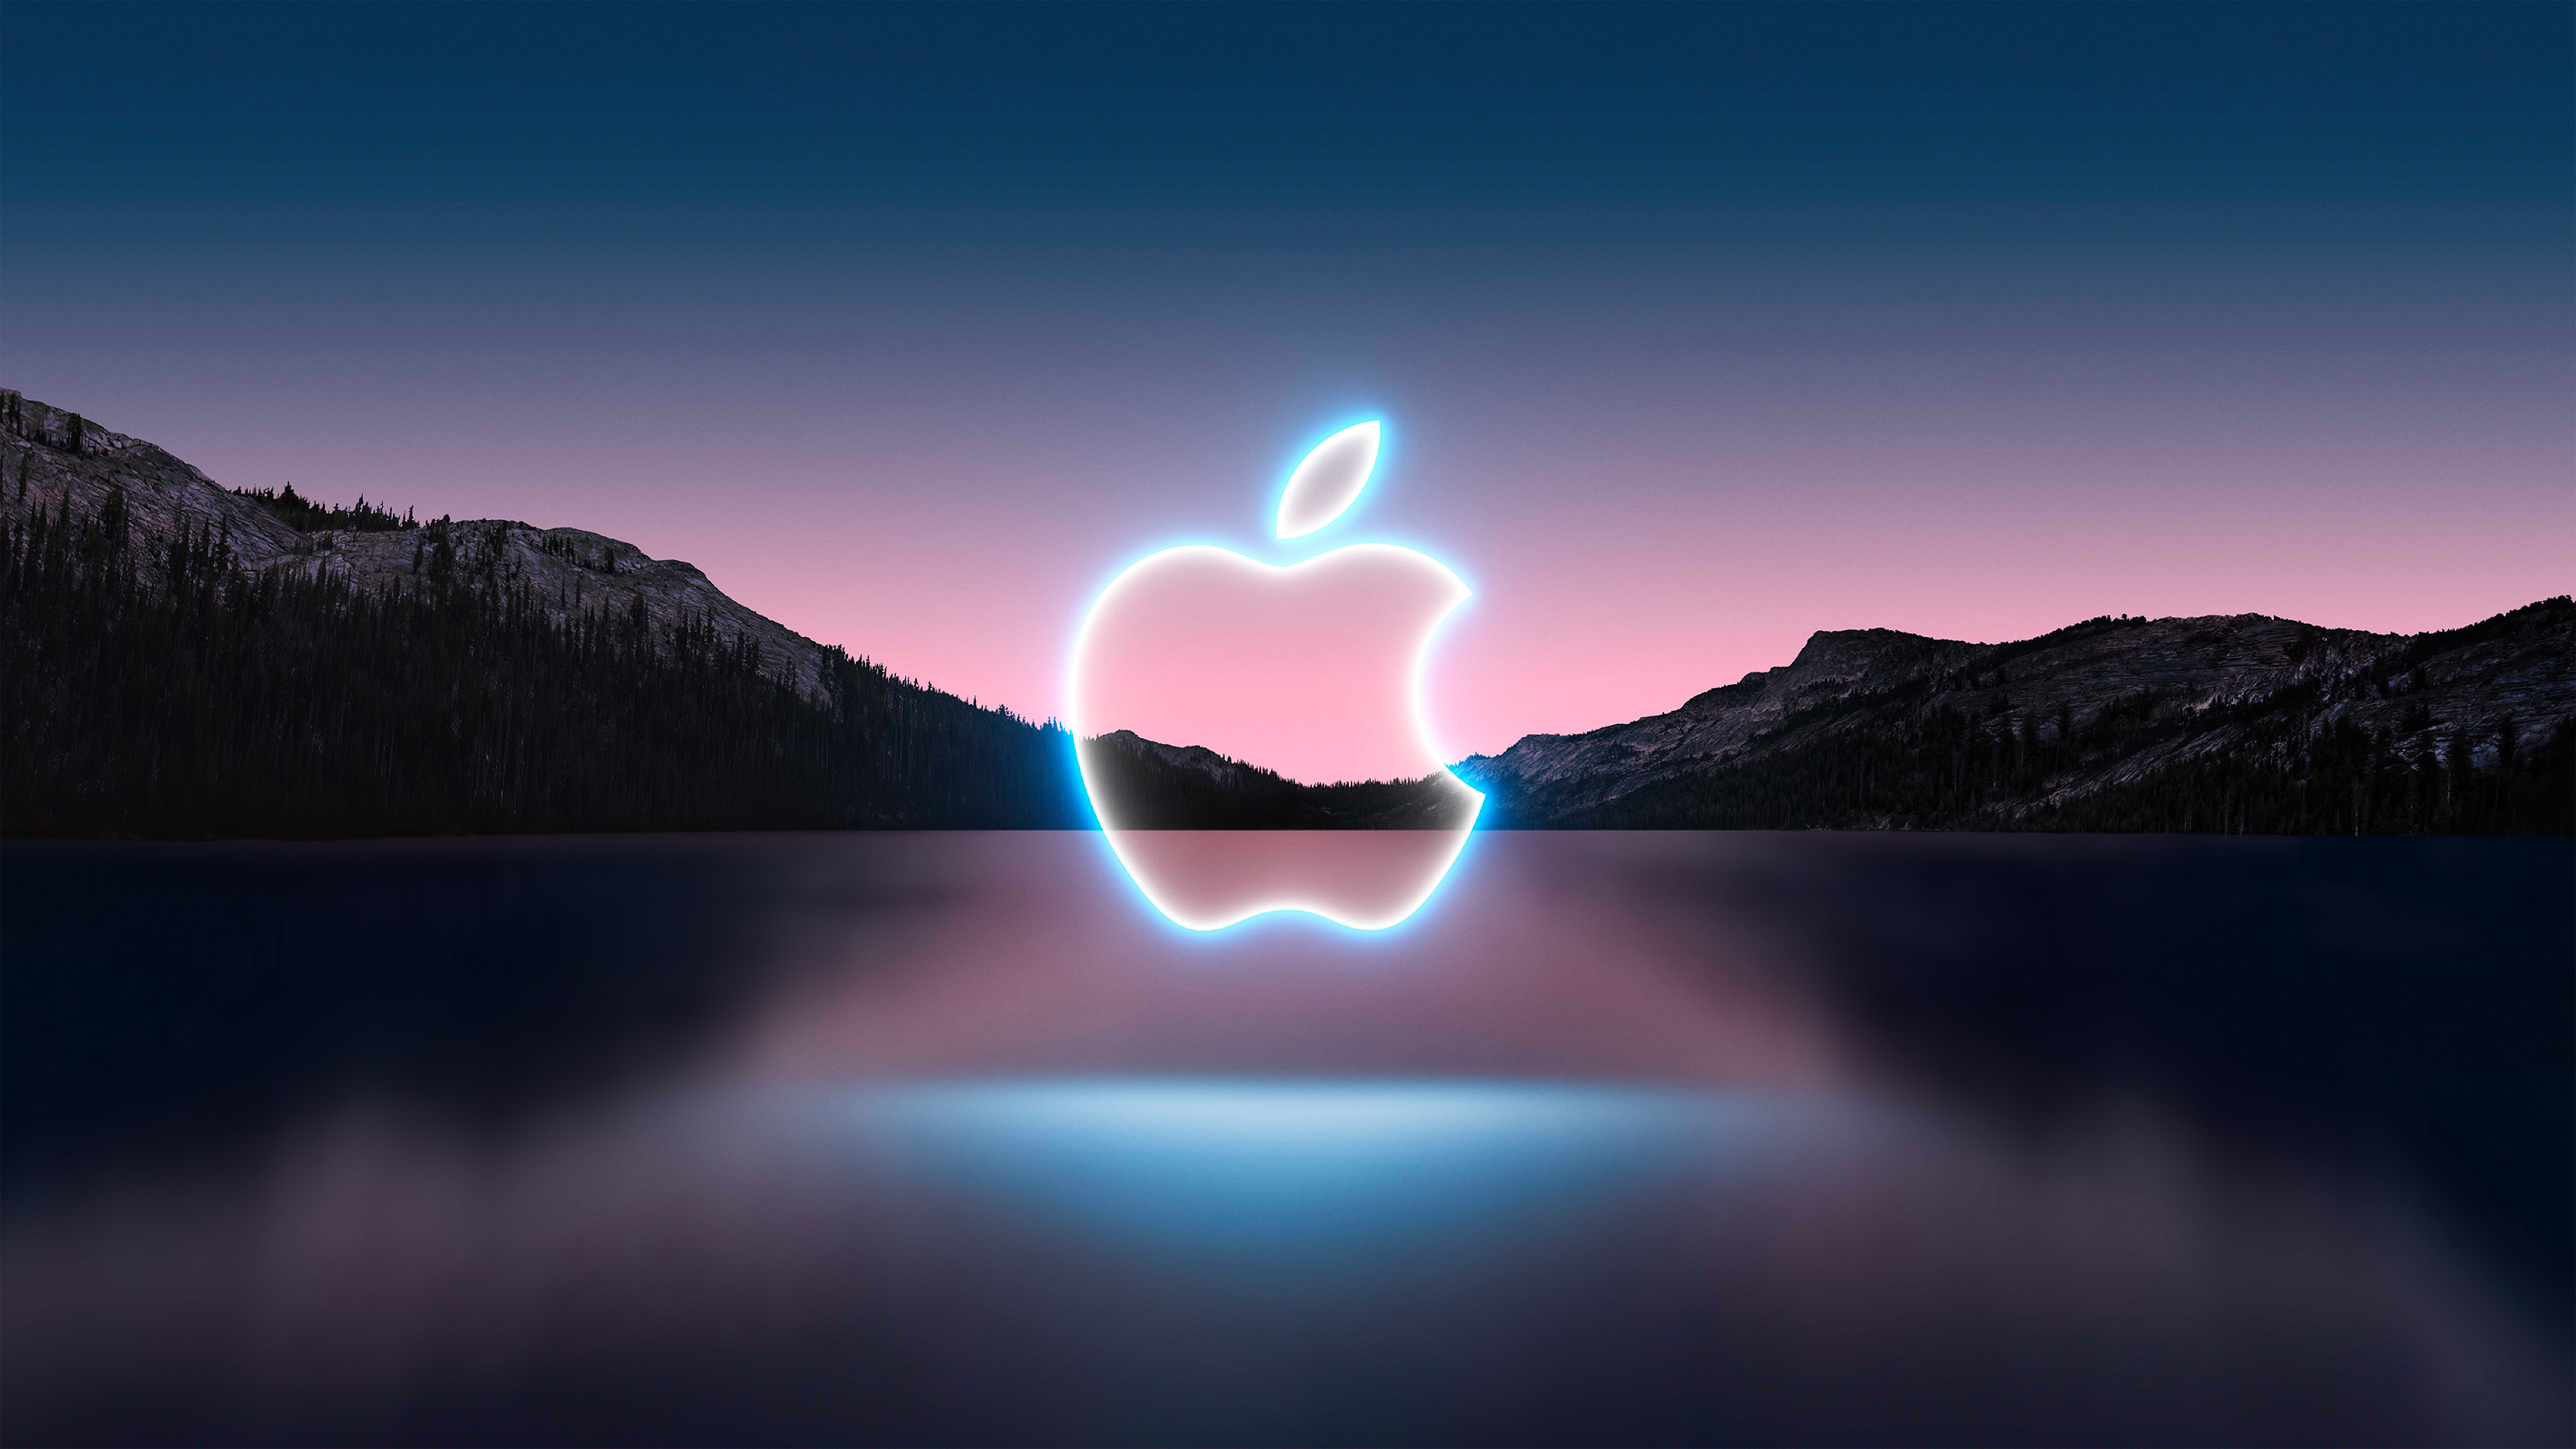 Apple event background hd puter k wallpapers images backgrounds photos and pictures